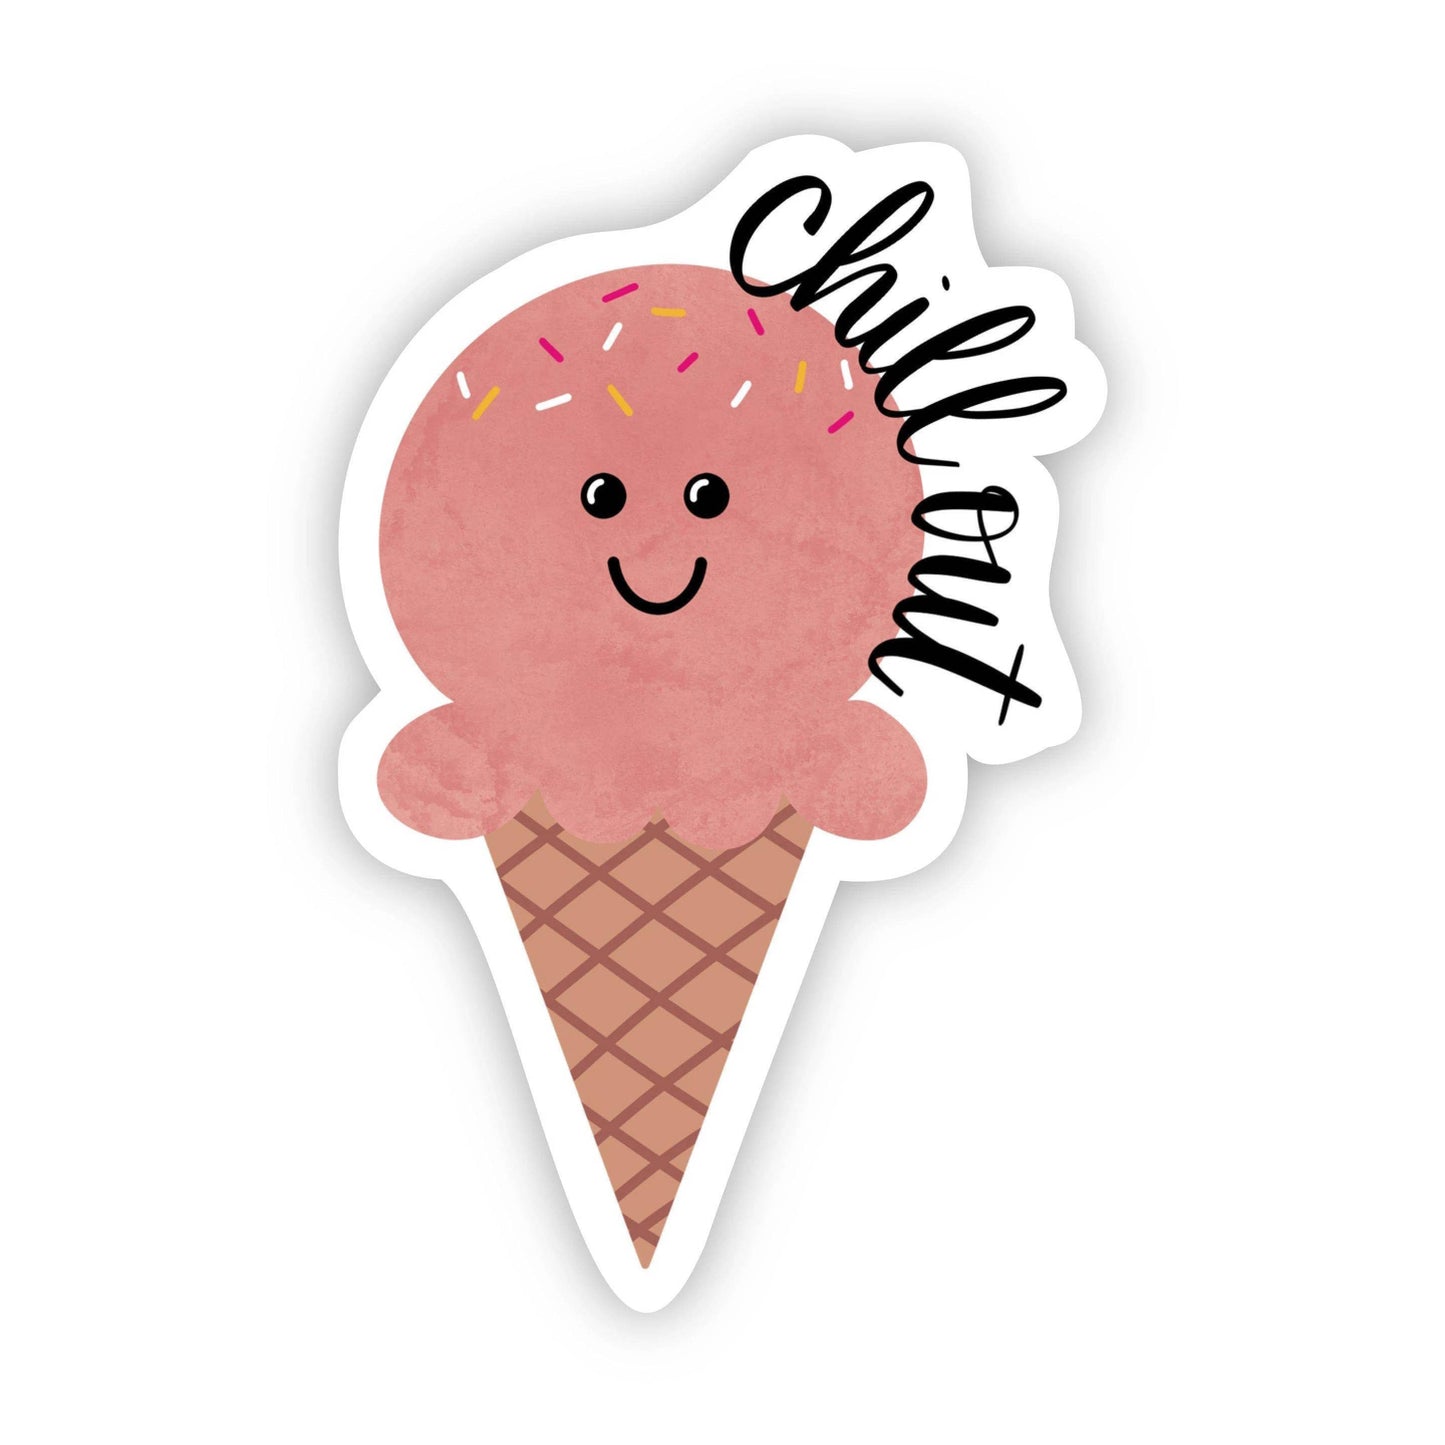 Sticker-Food-07: Chill out Ice Cream